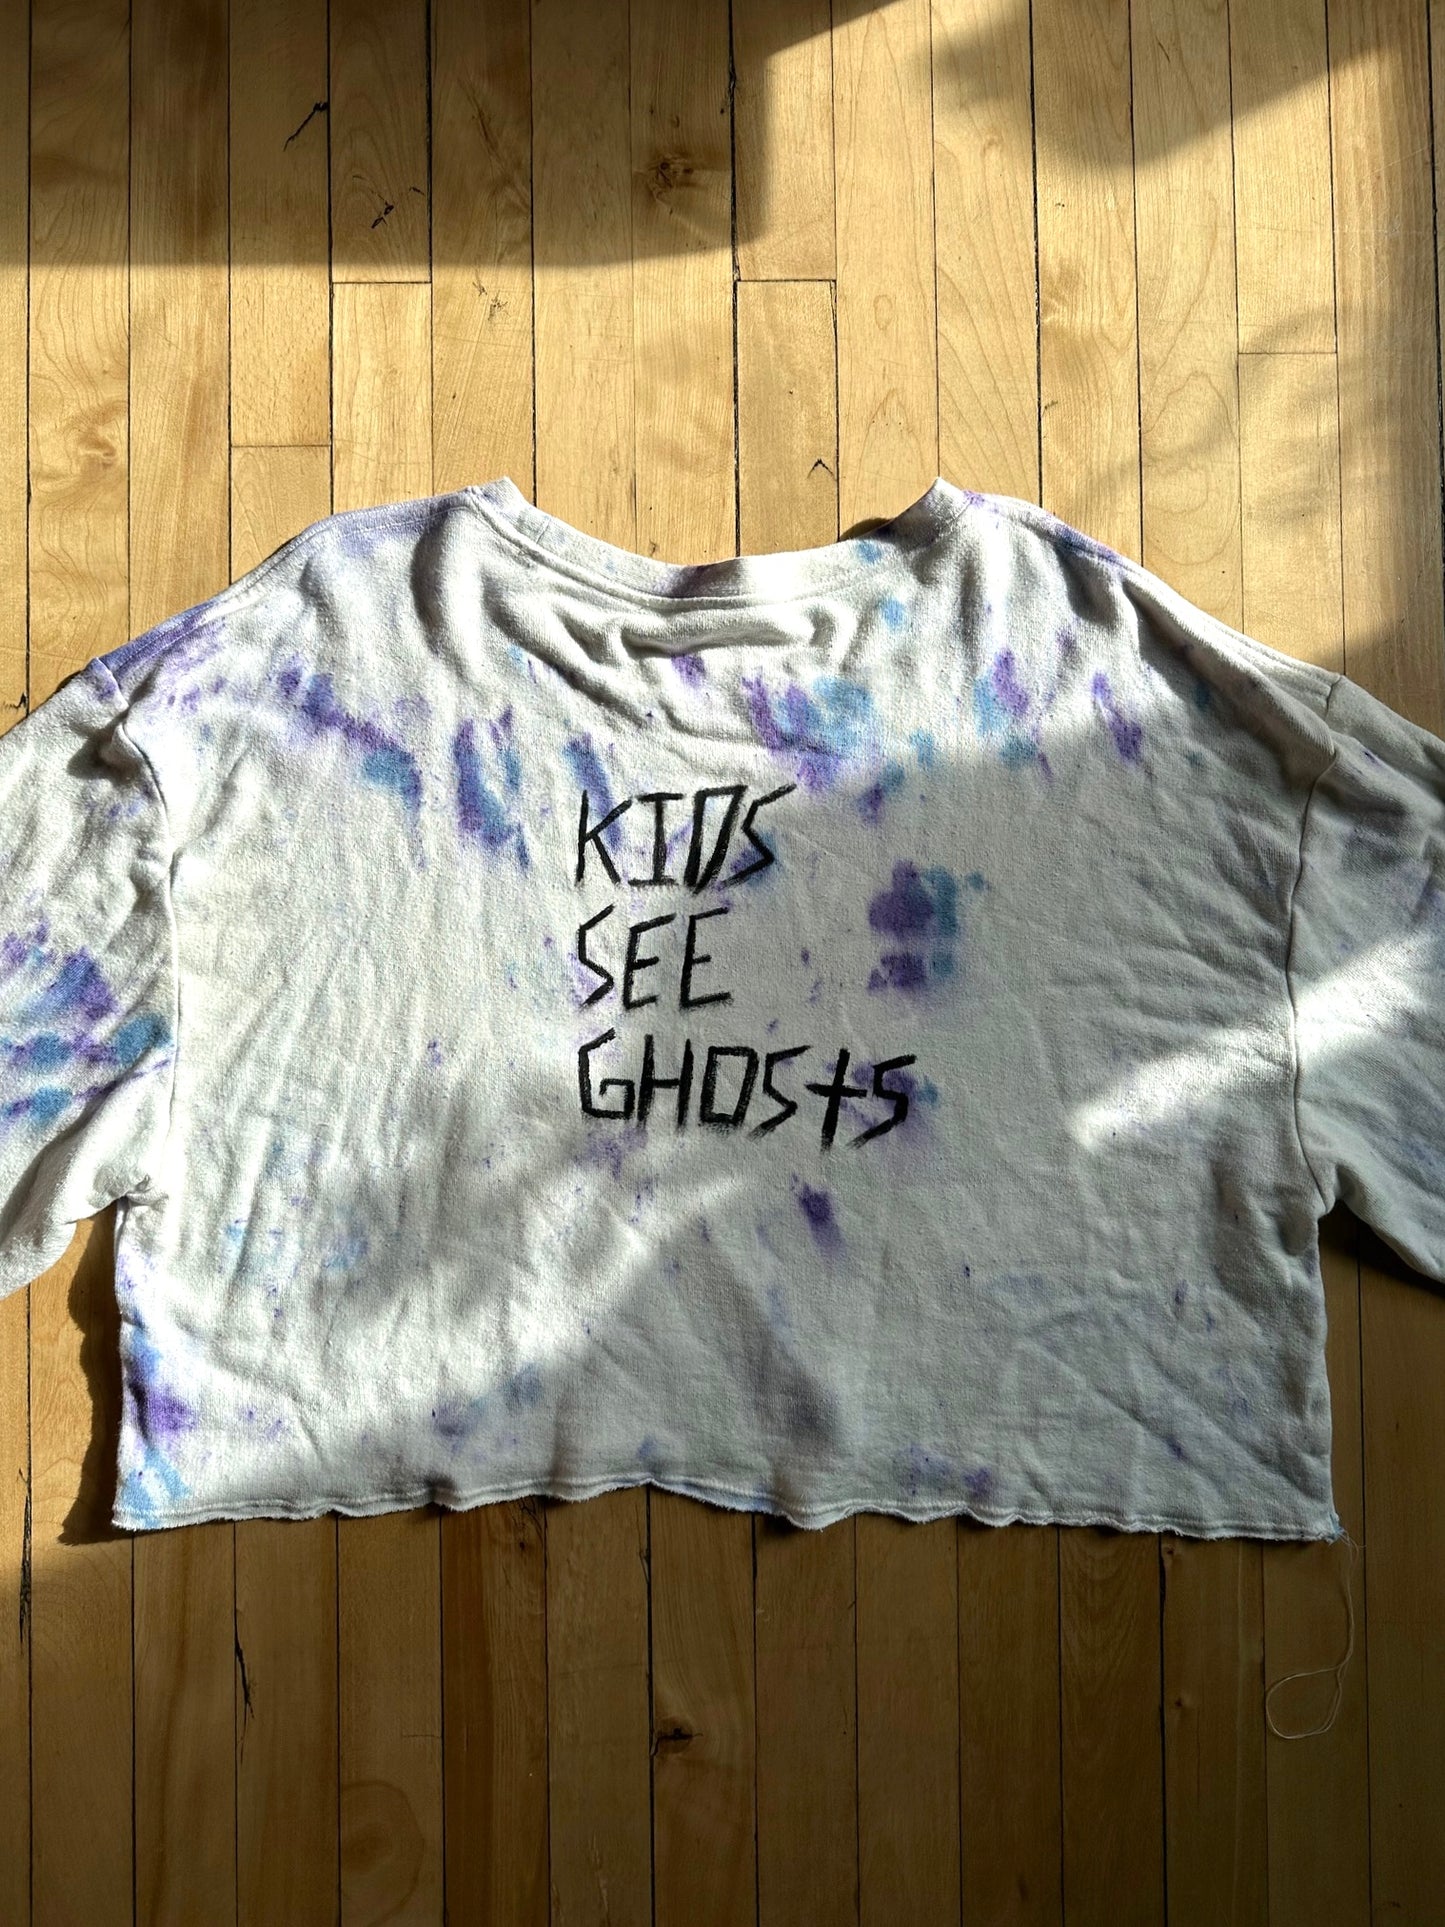 Collection Sauvage - Kids See Ghosts (1/1)